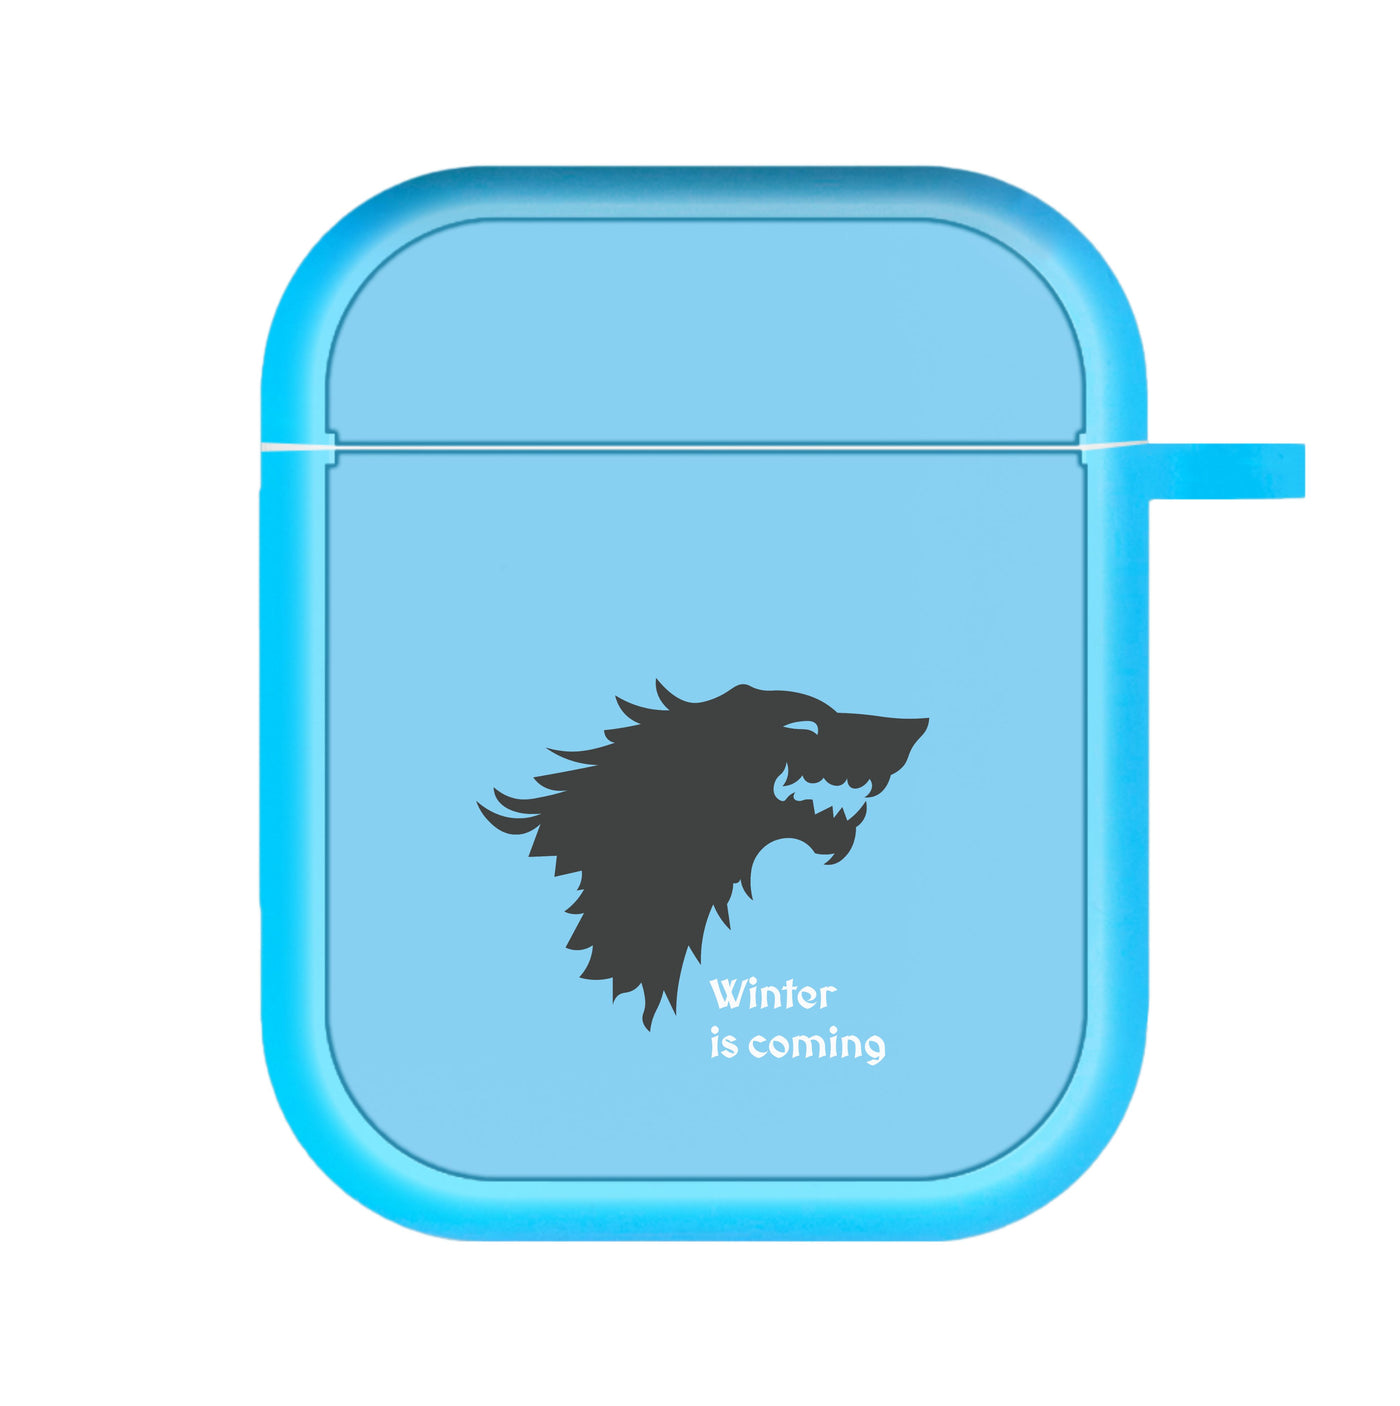 Winter Is Coming - Game Of Thrones AirPods Case